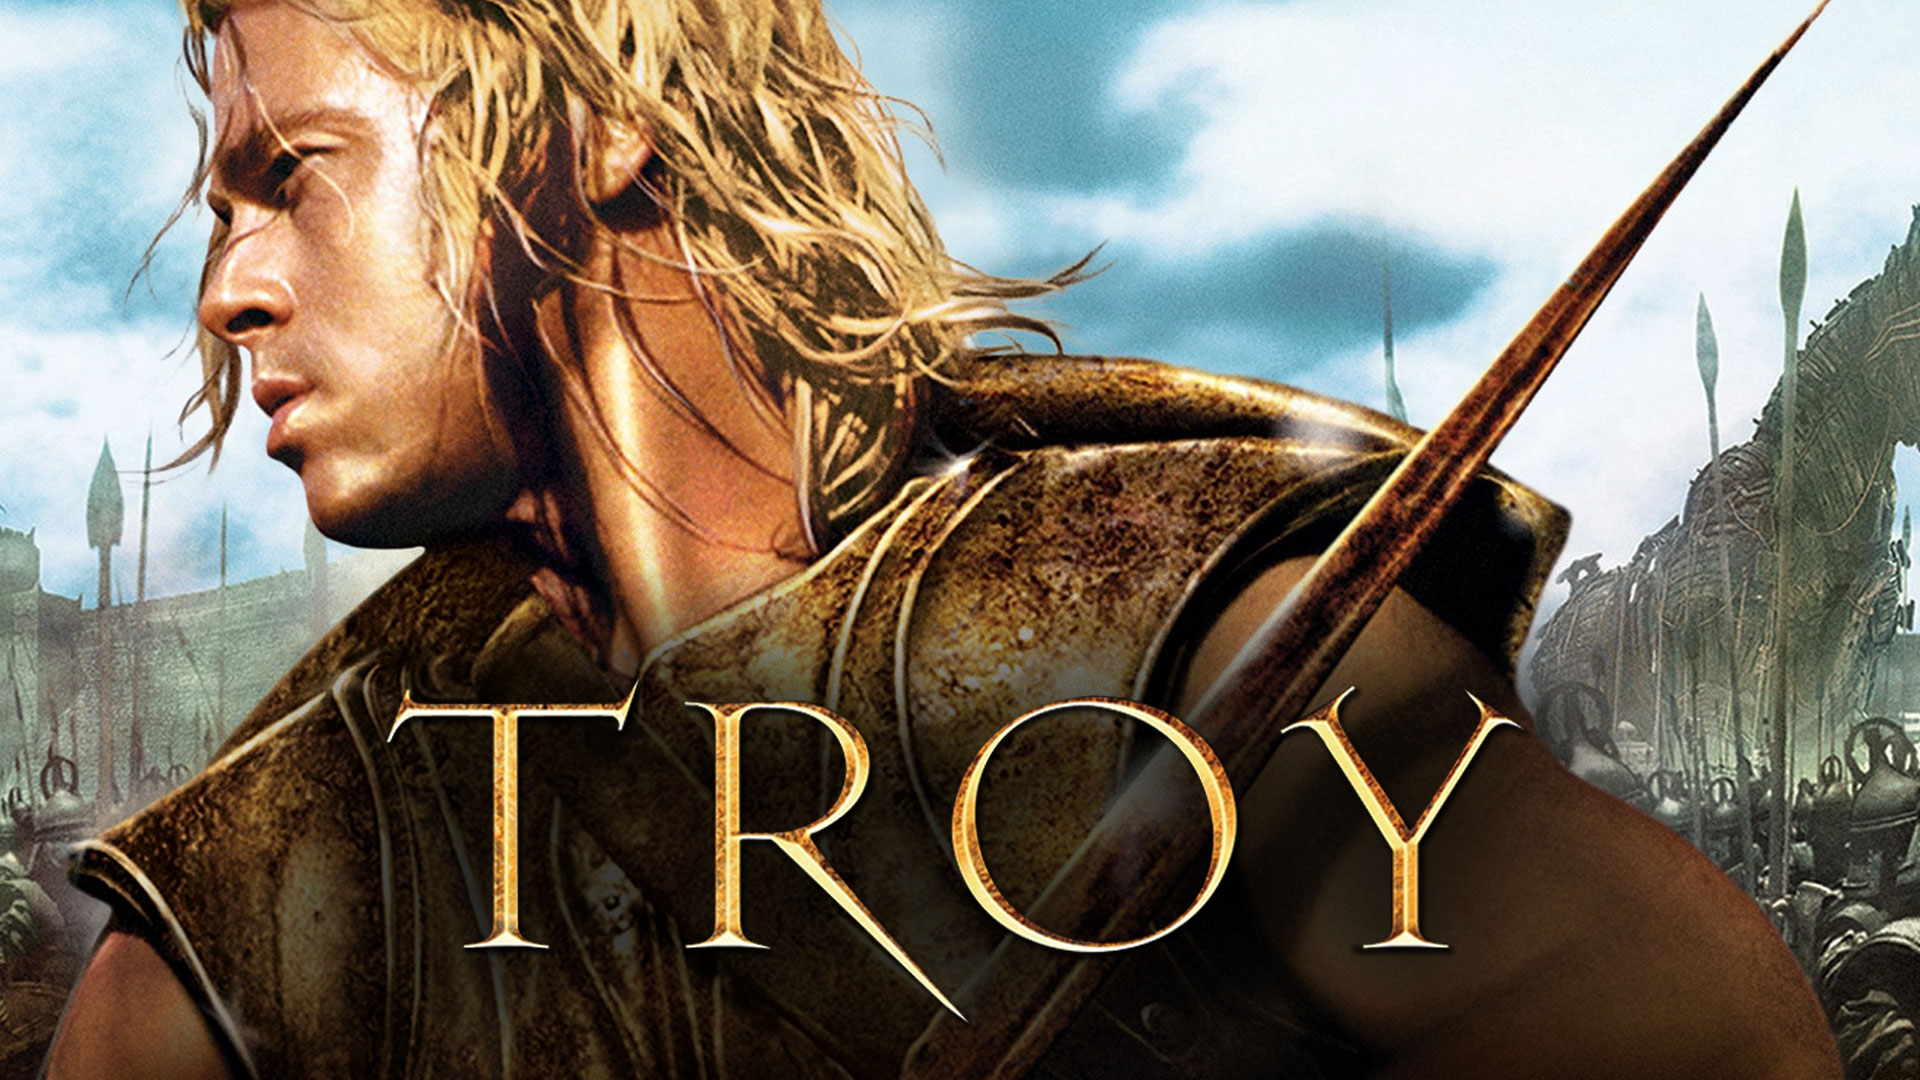 alicia fultz recommends Troy Full Movie Hd